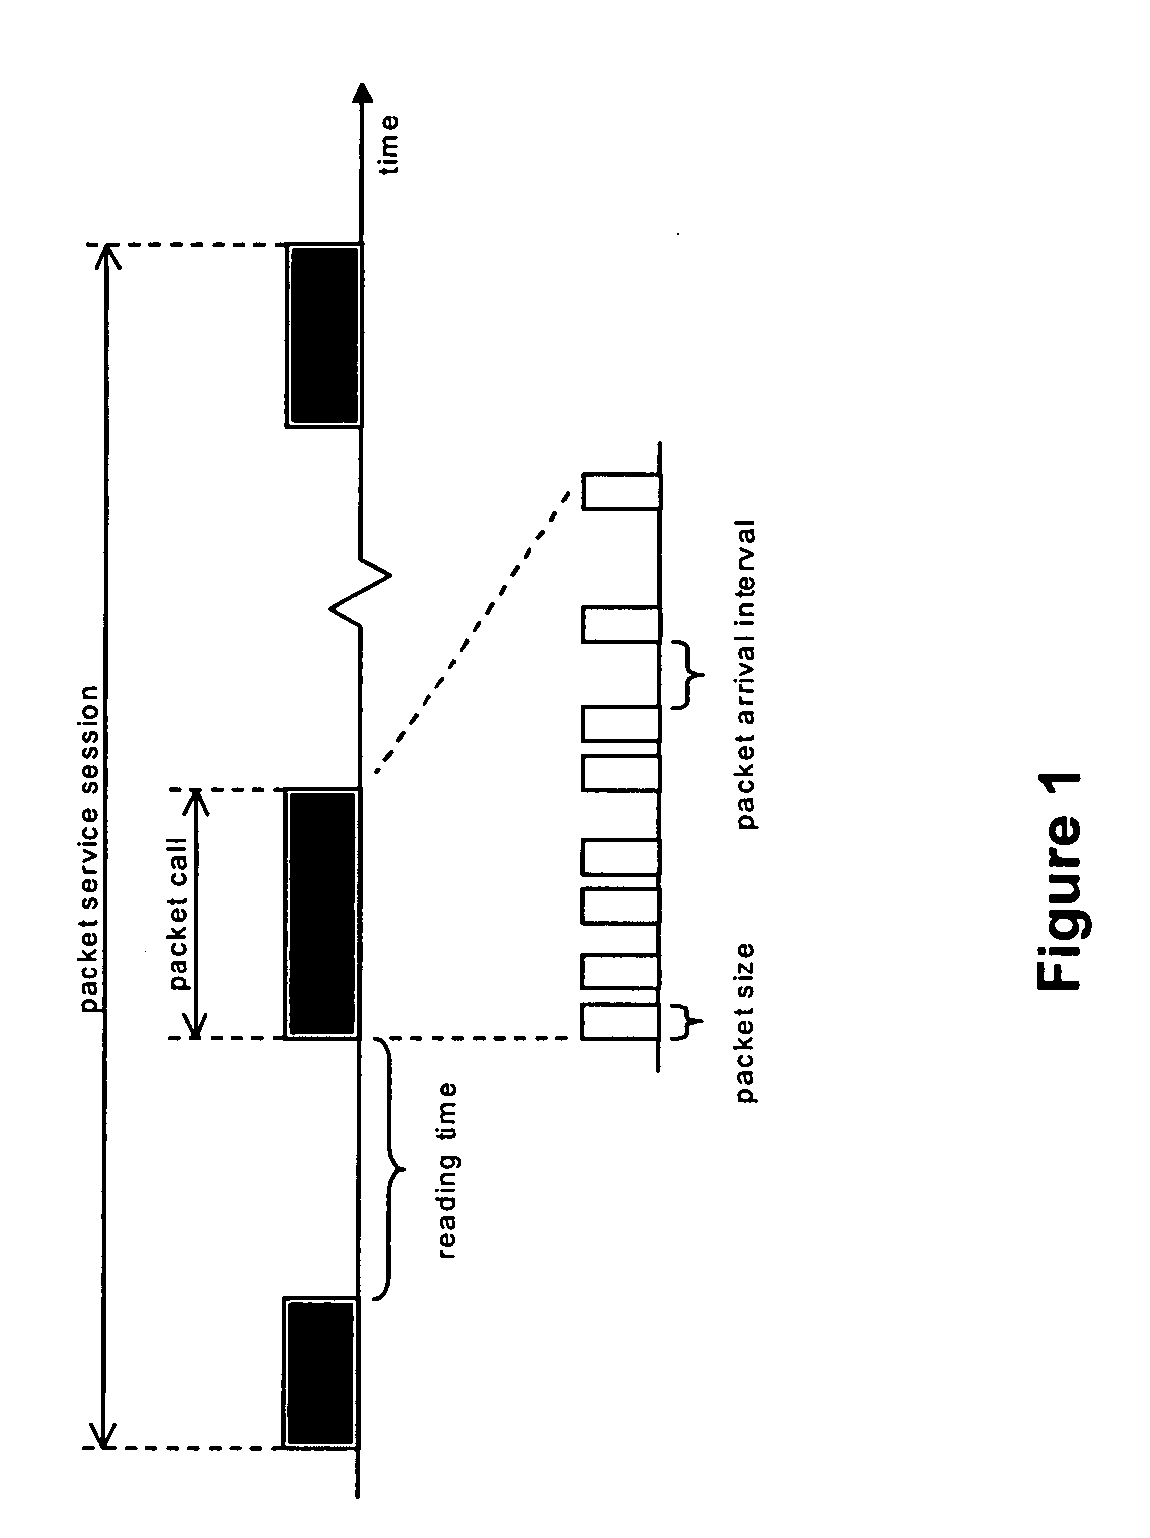 Adaptive preamble length for continuous connectivity transmission